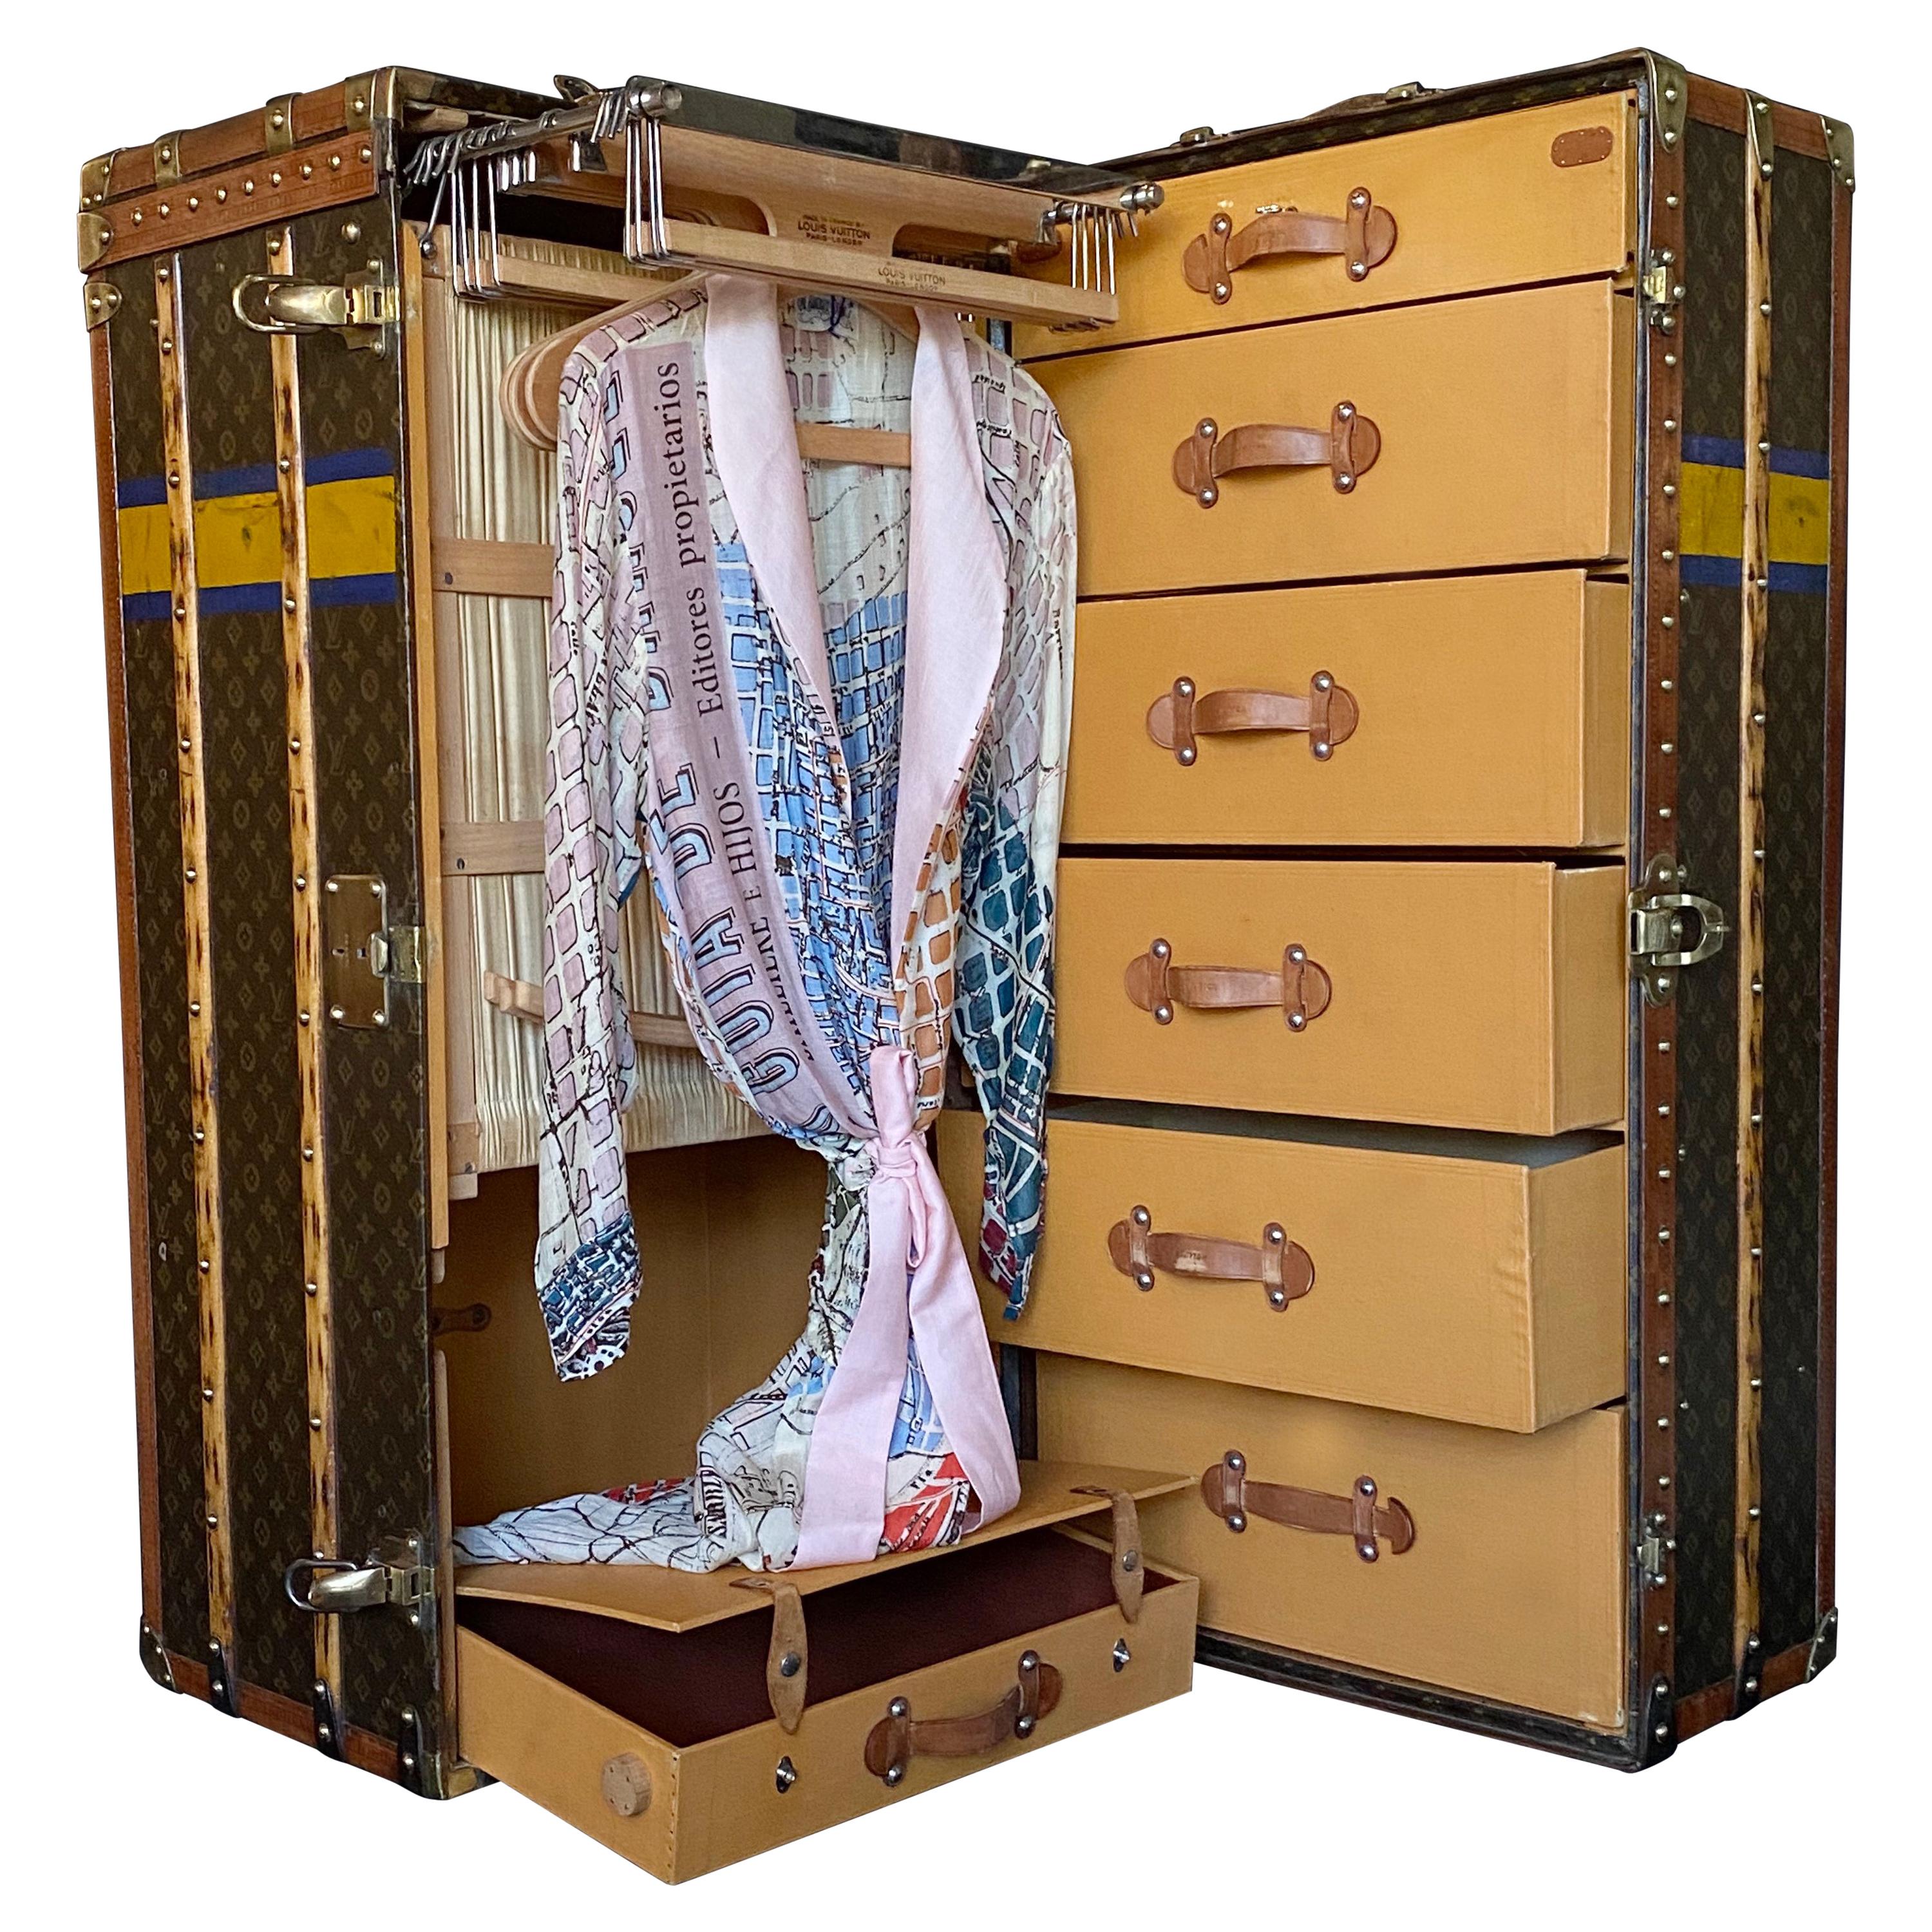 LOUIS VUITTON  STEAMER TRUNK POSSIBLY FROM THE COLLECTION OF LOUIS COMFORT  TIFFANY  Design  20th Century Design  Sothebys